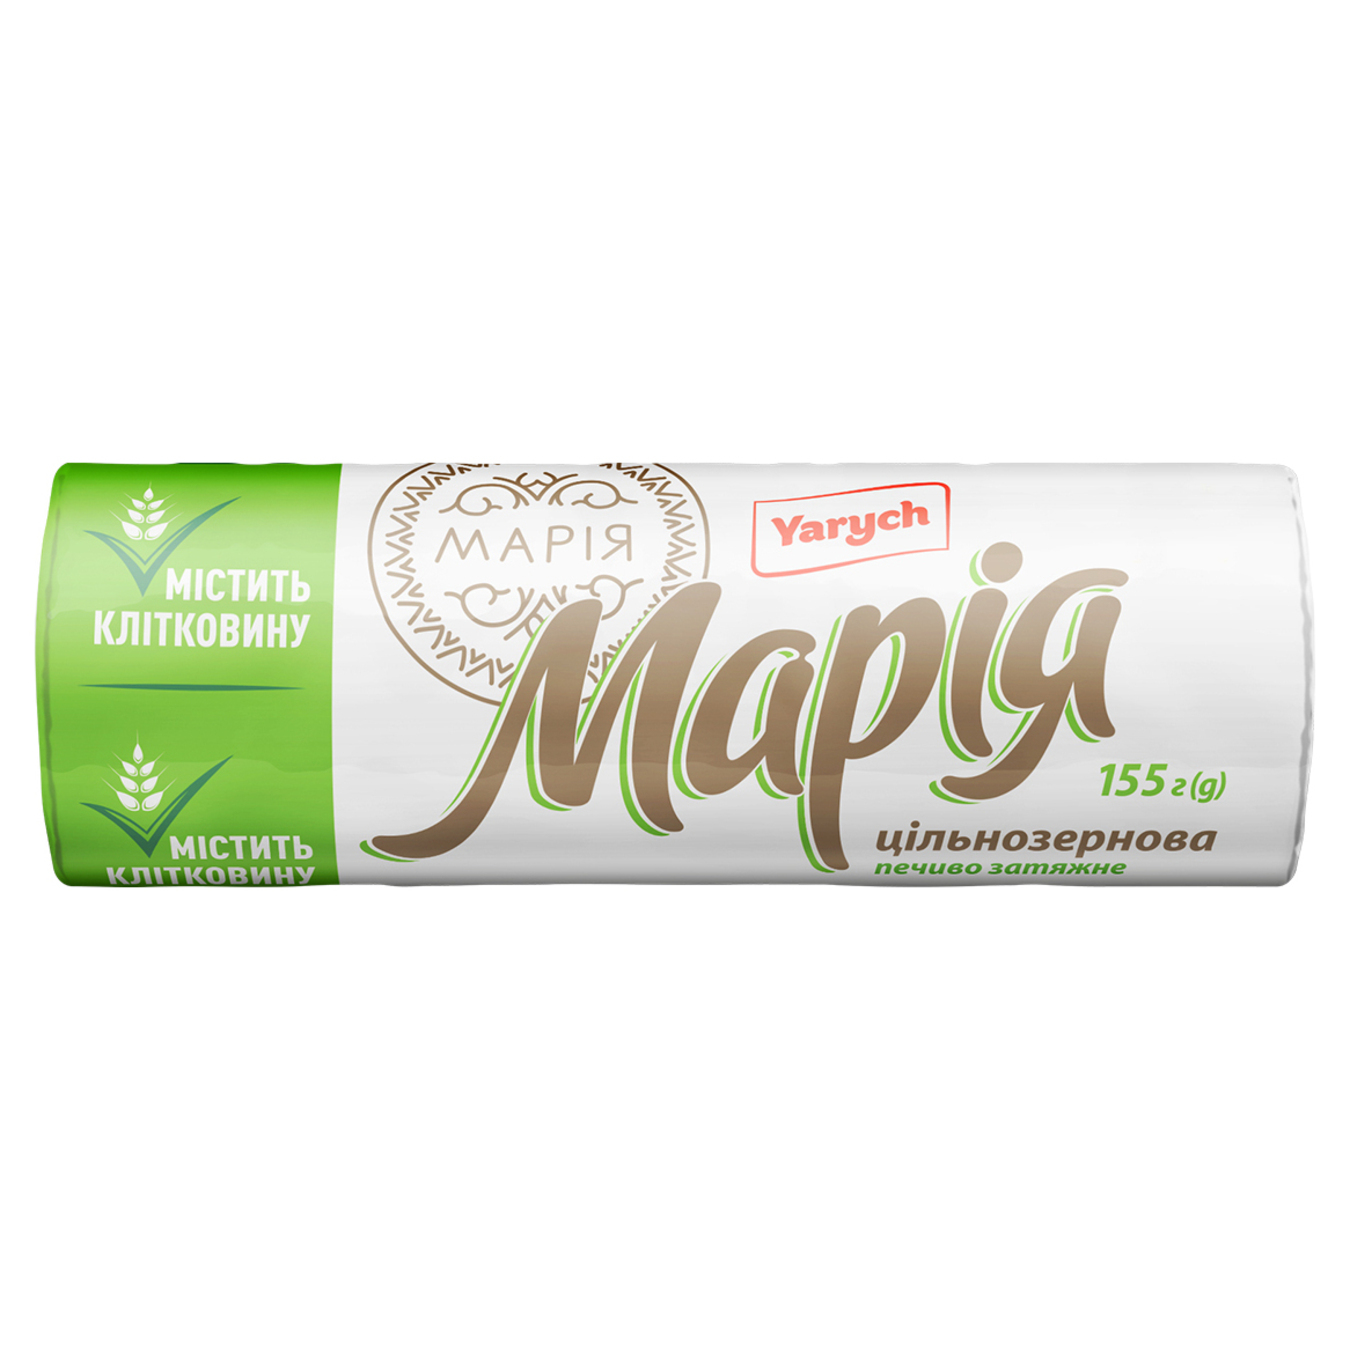 Yarych Maria Whole Grain Cookies 155g 2